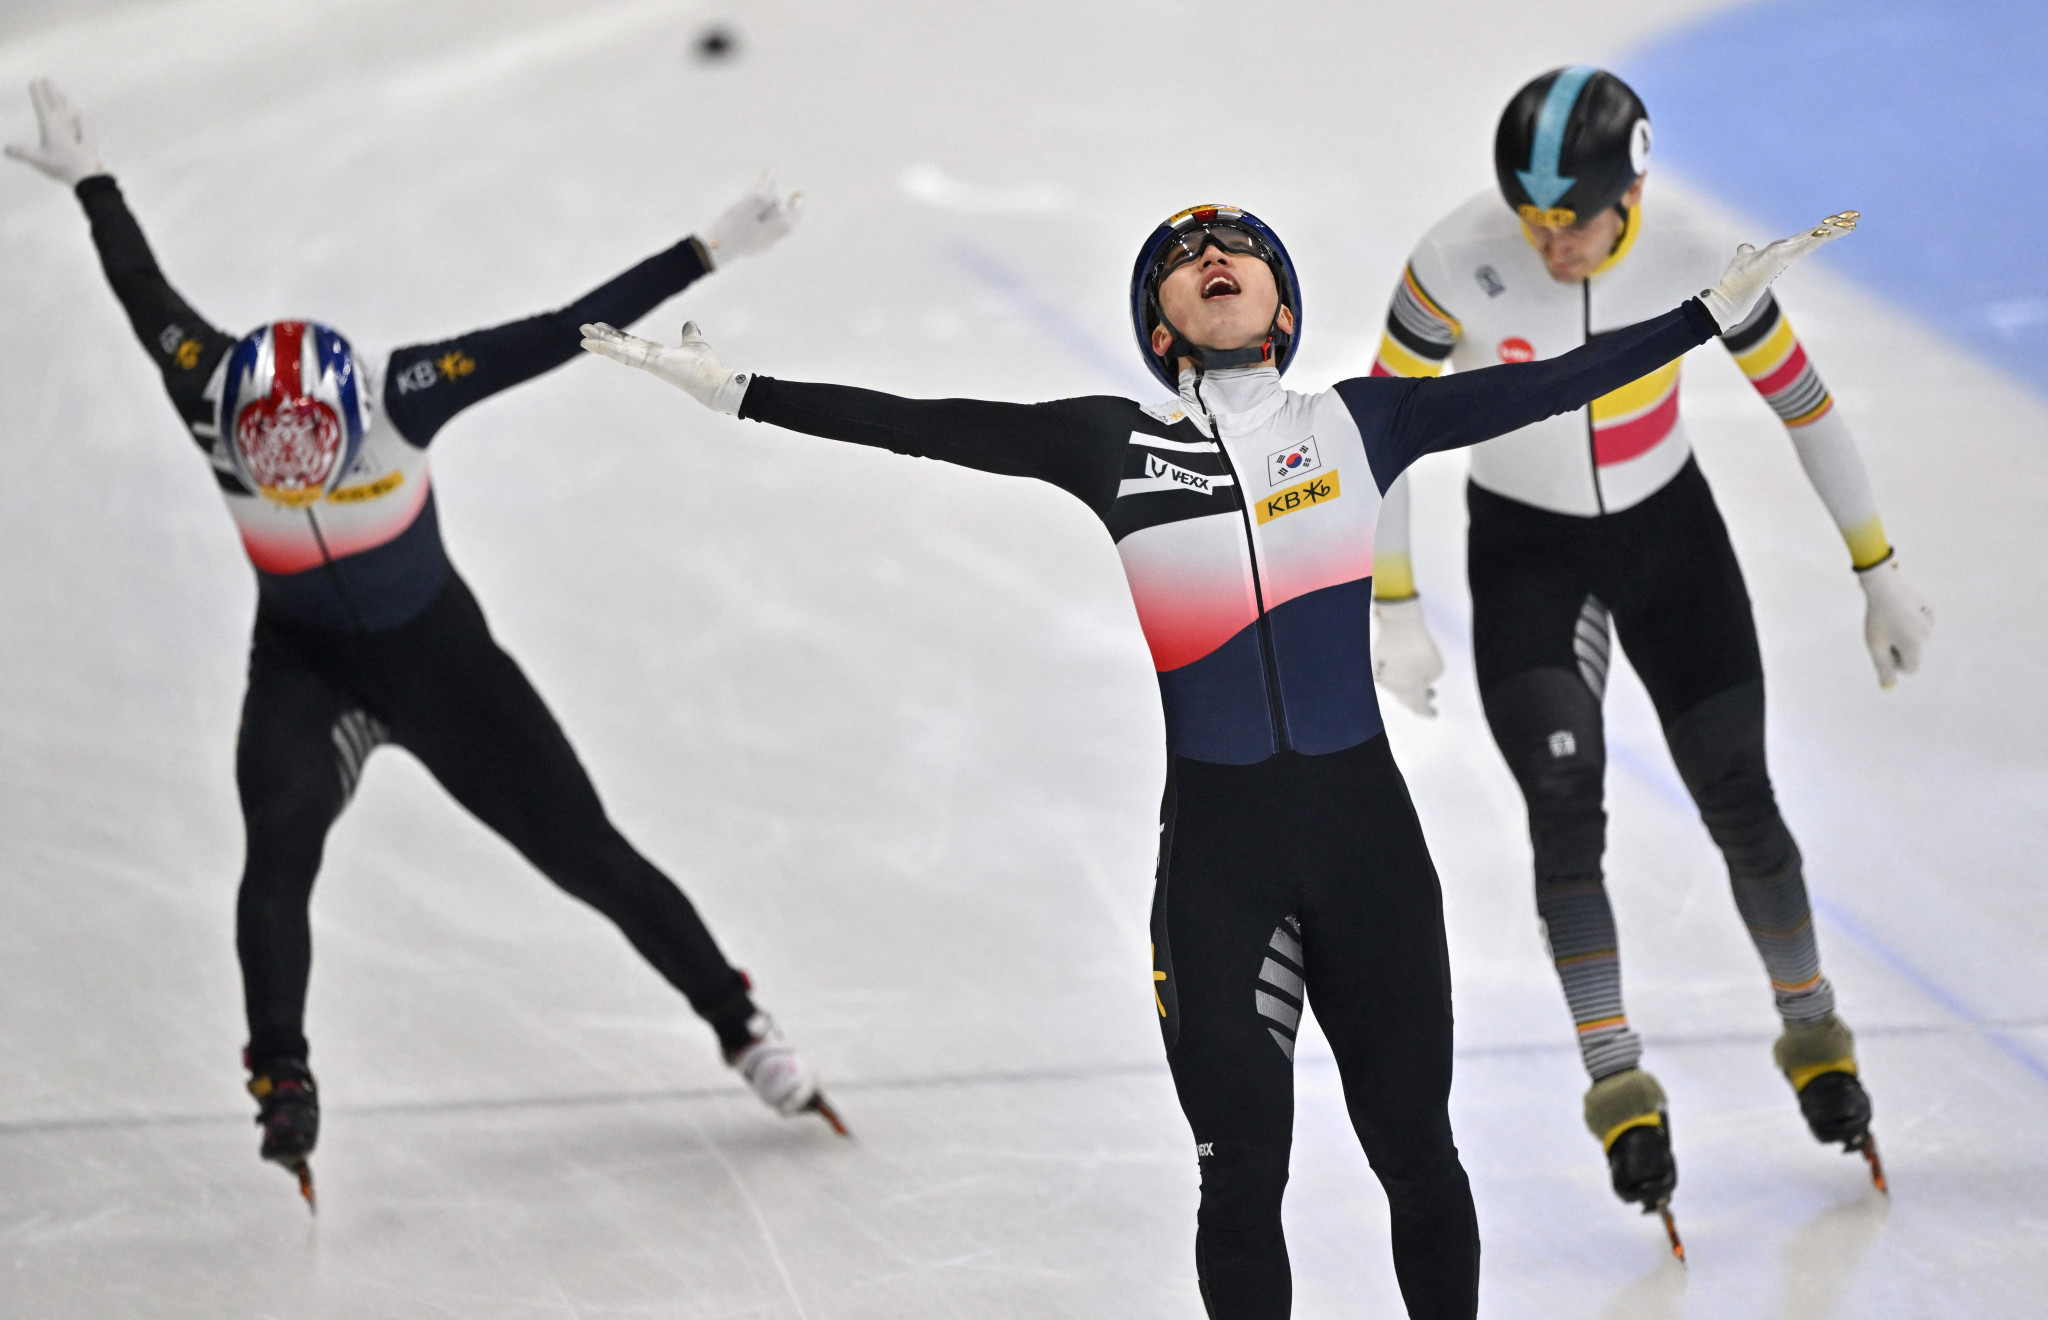 Park Ji-won won men's 1,000m gold for hosts South Korea on the final day of the World Championships ©Getty Images